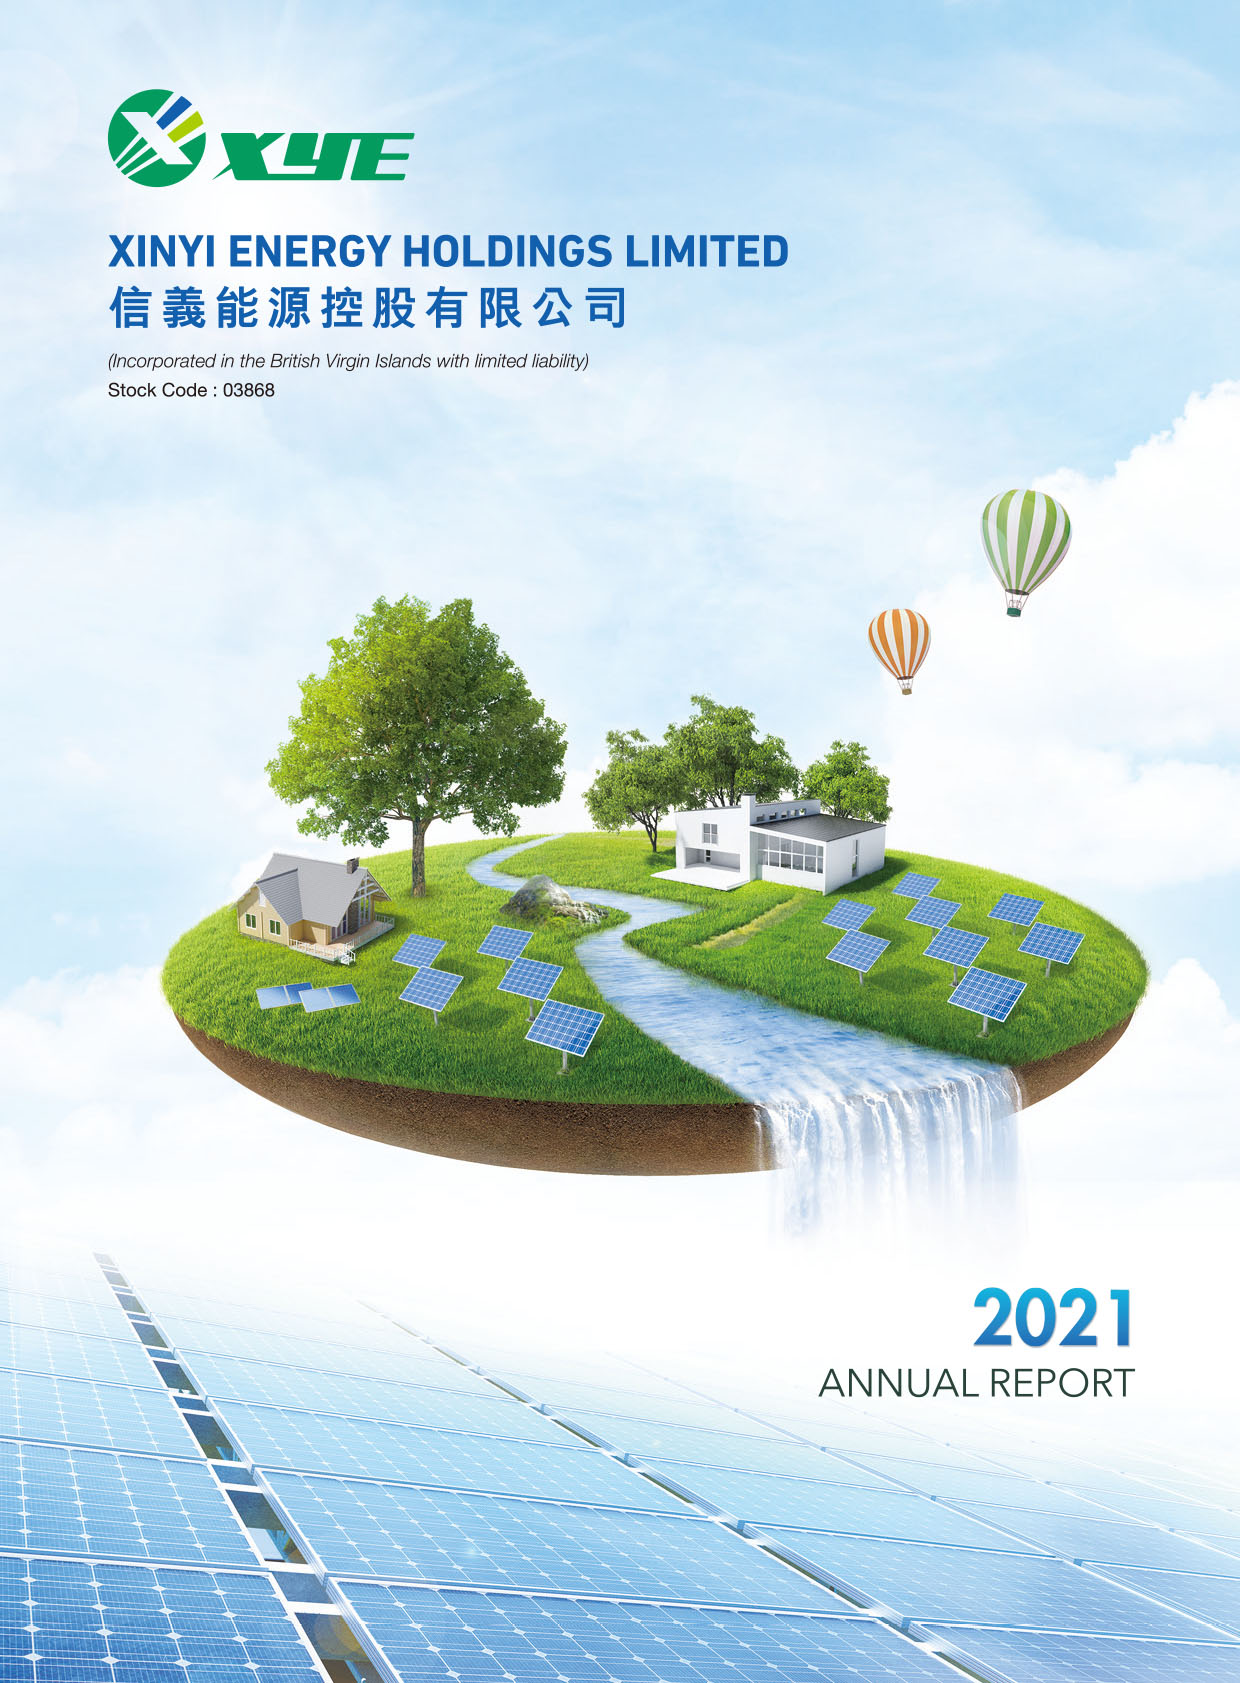 Xinyi Energy Holdings Limited